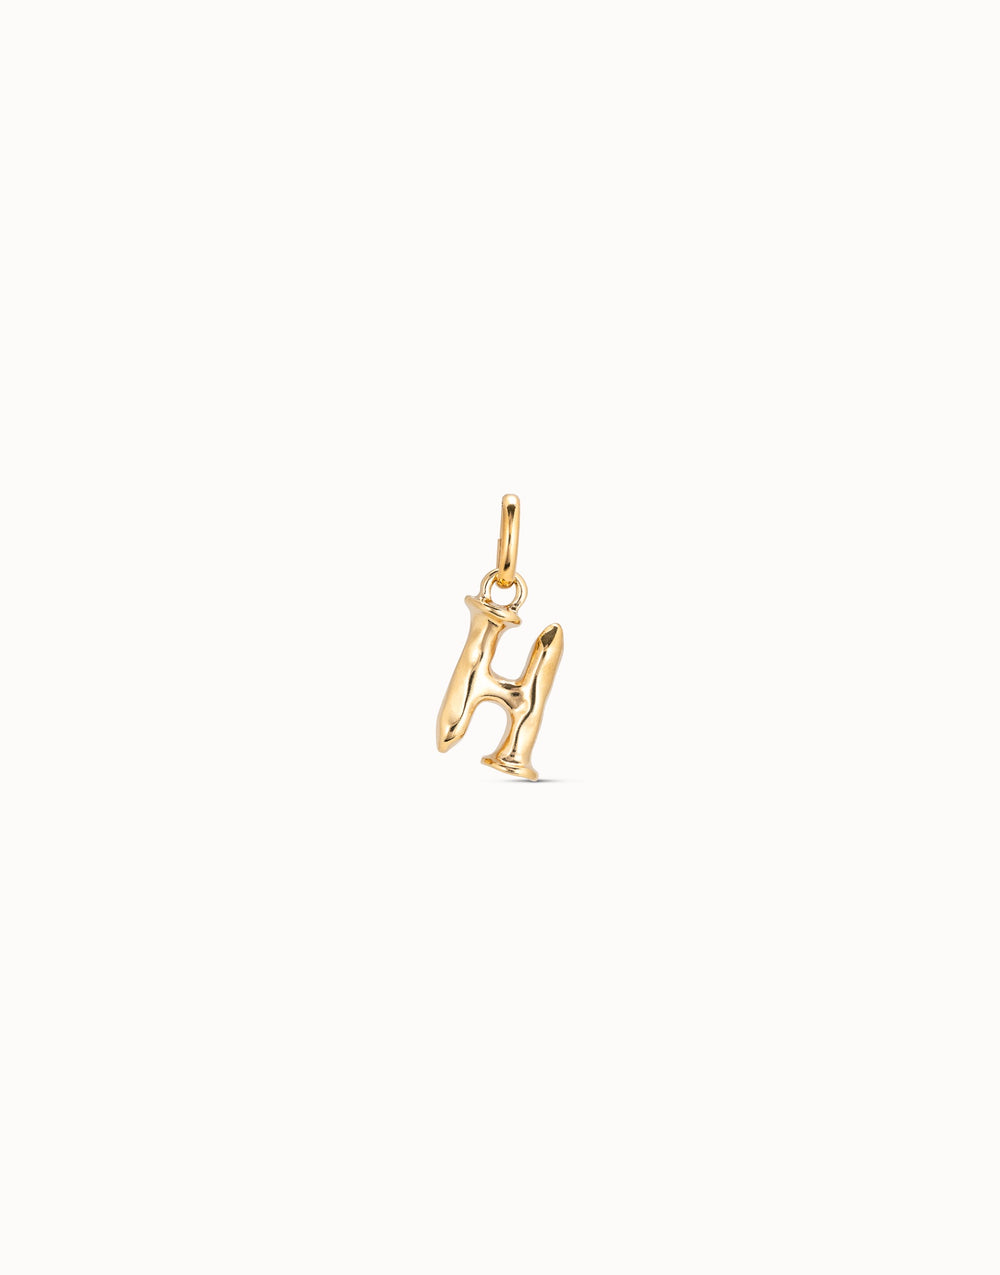 UNode50 Small Letter H Charm - Gold